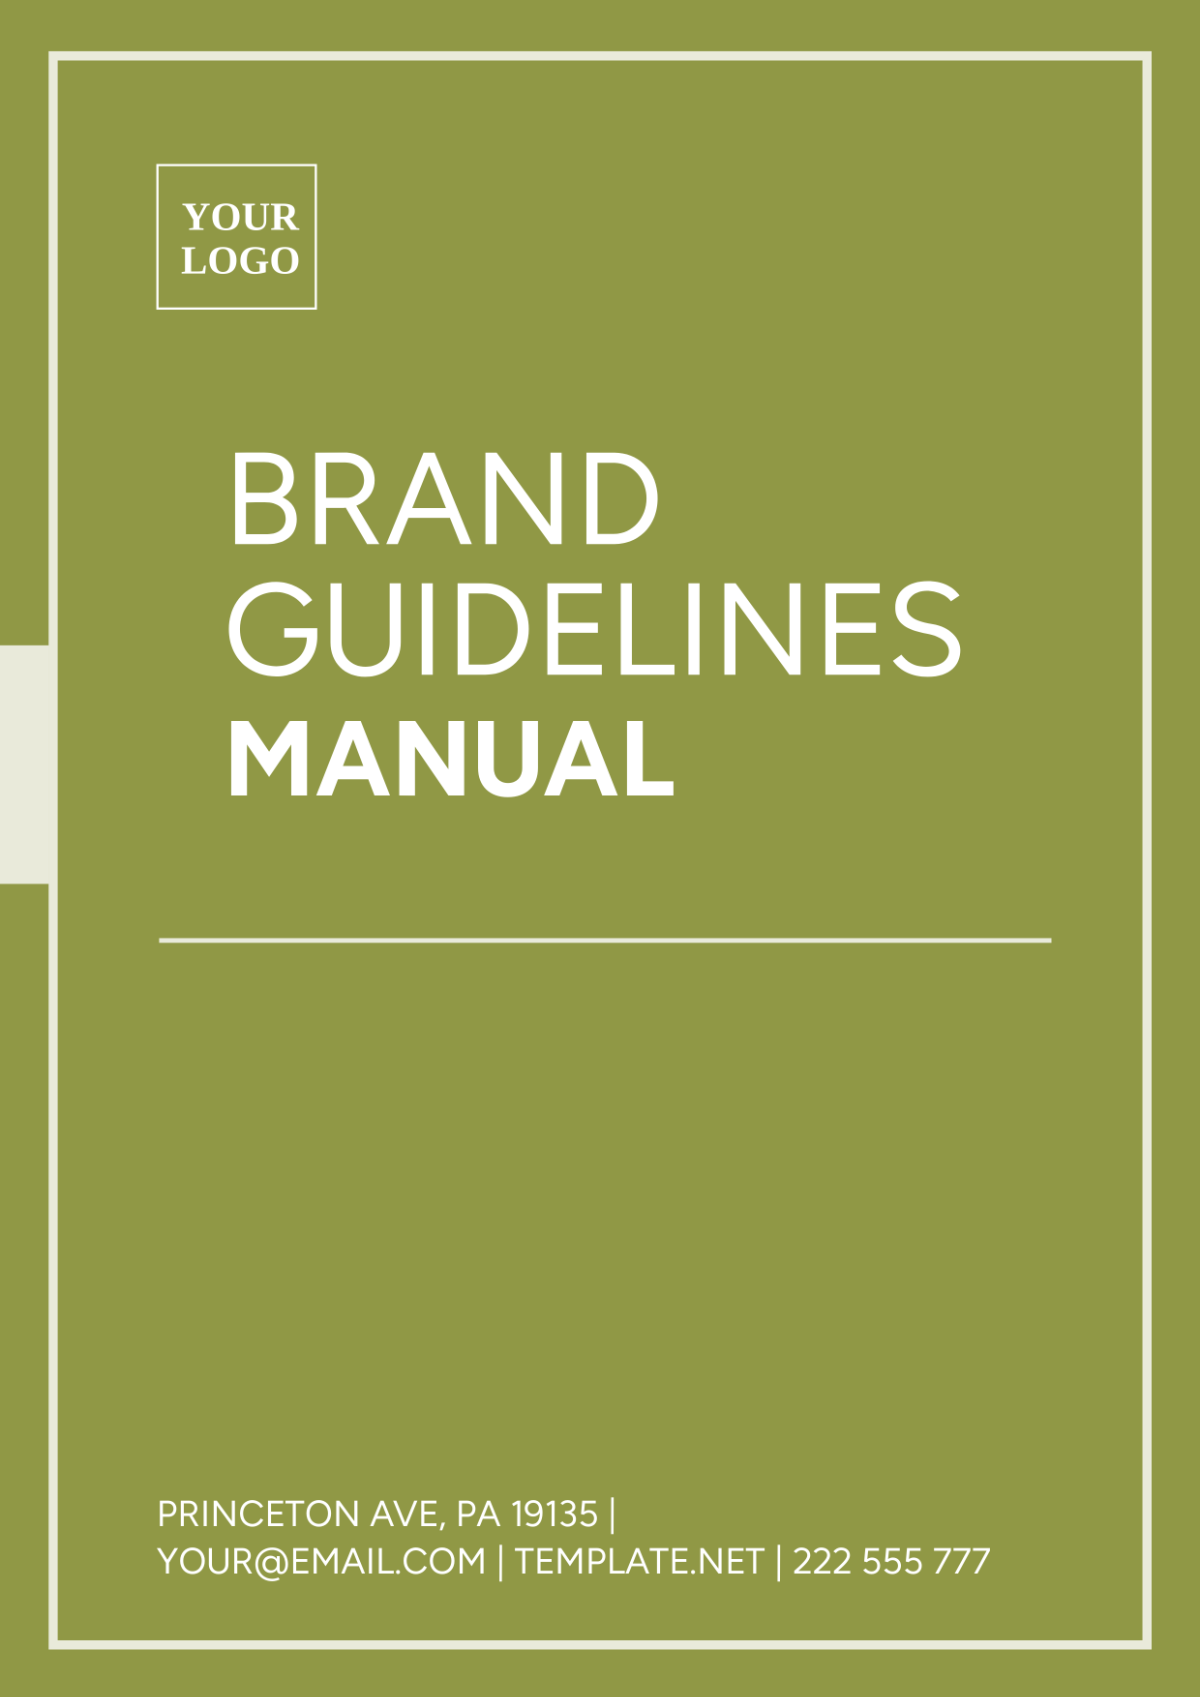 Brand Guidelines Manual Template